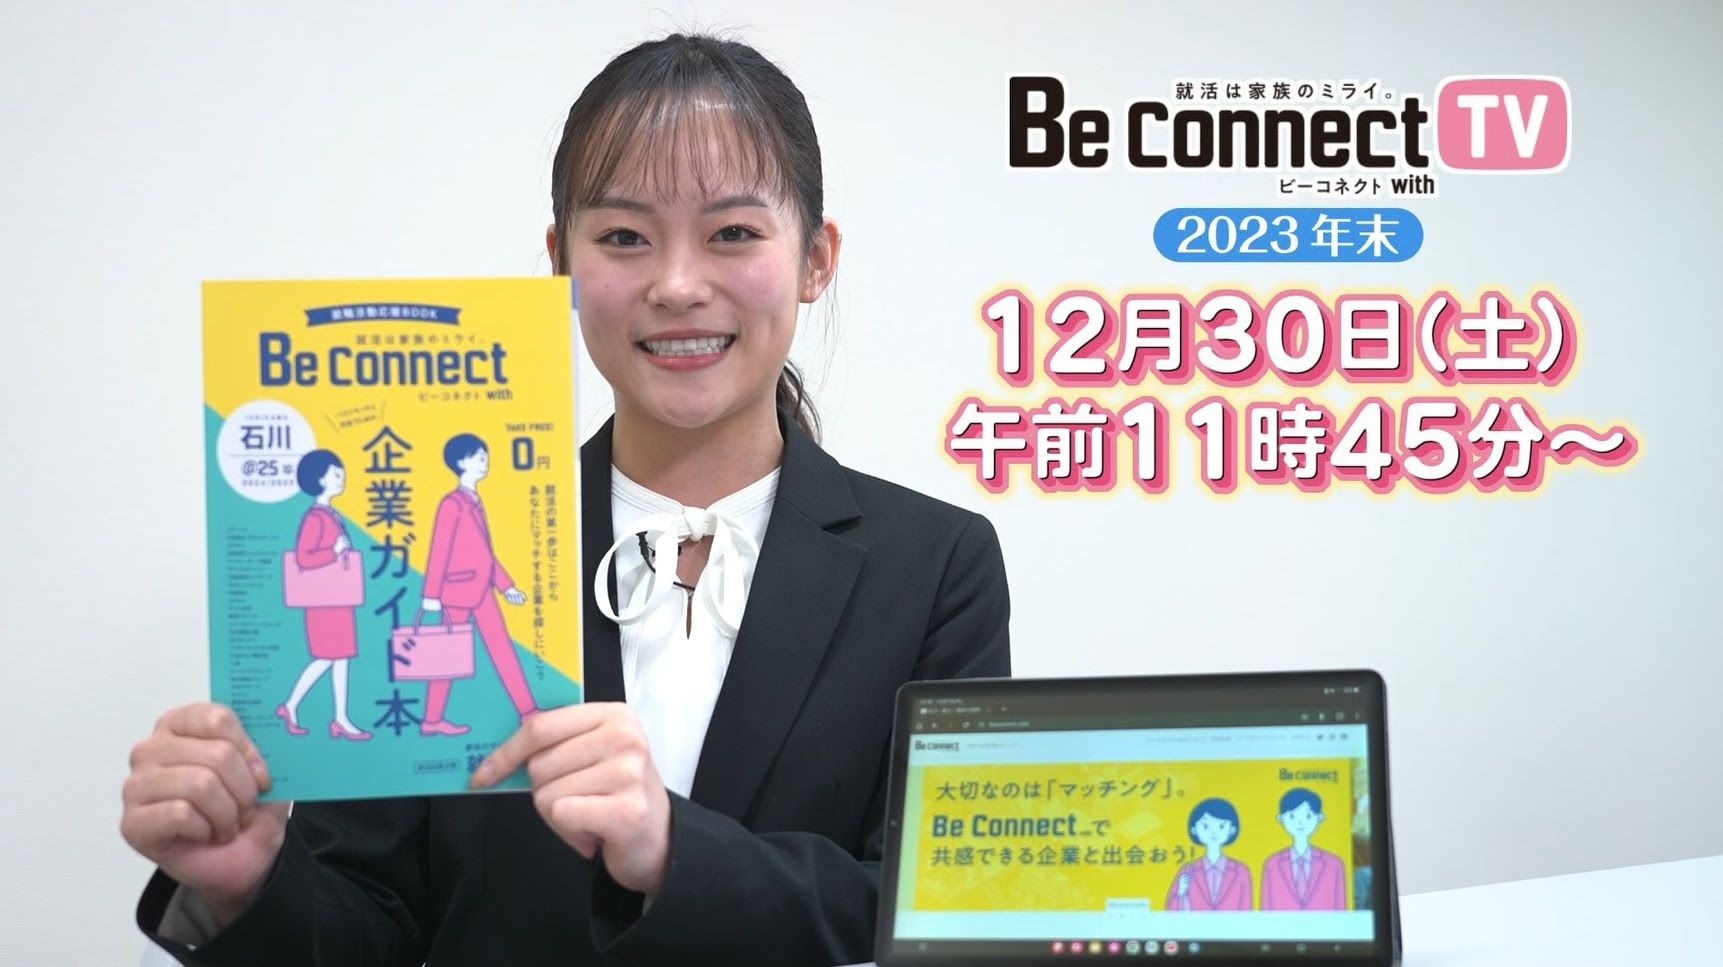 Be Connect with TV ～2023年末〜